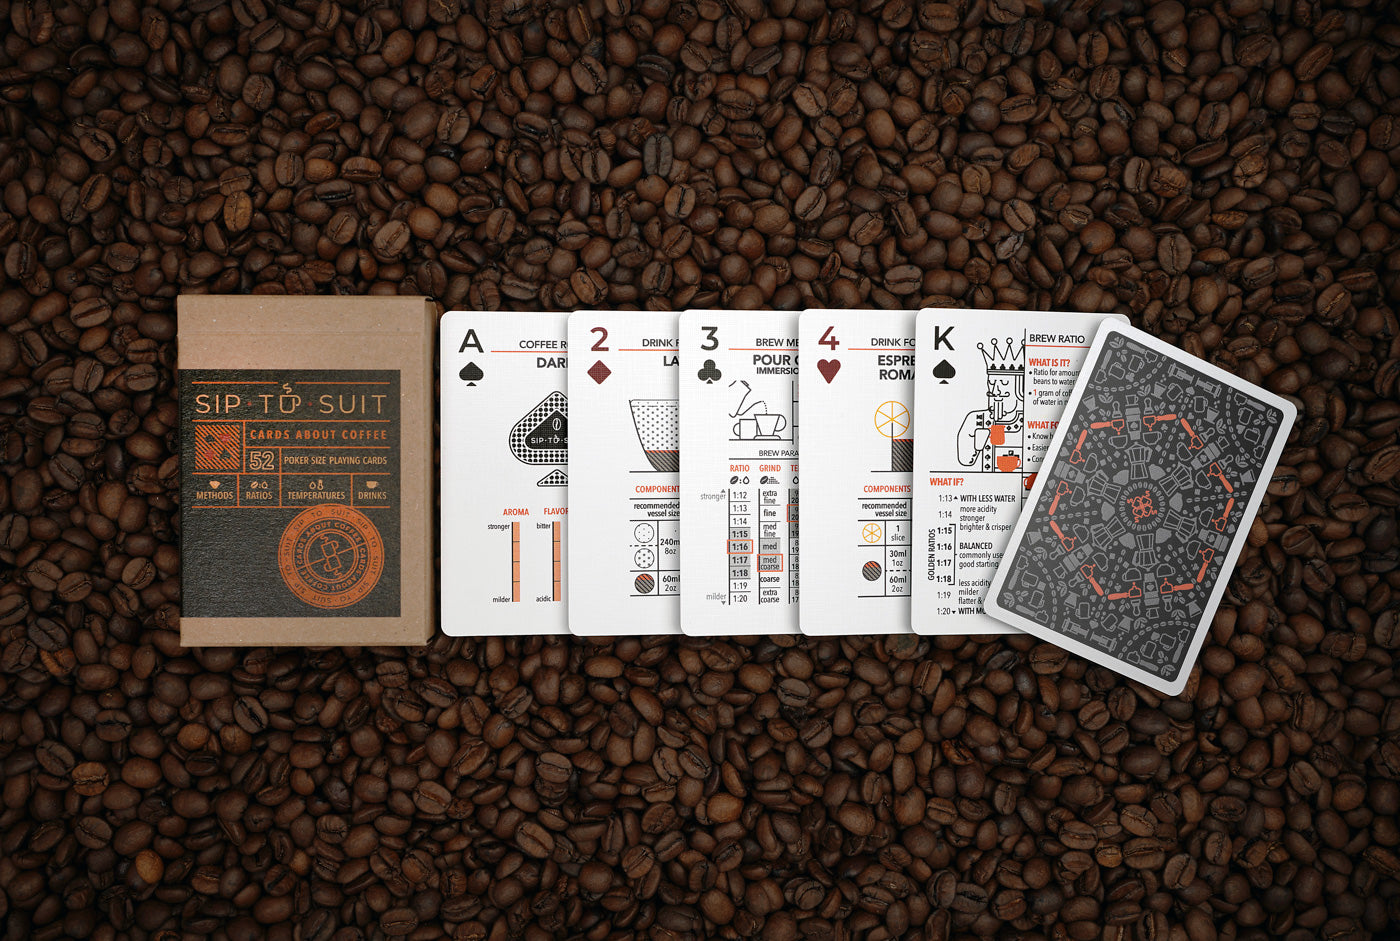 SIP-TO-SUIT Cards About Coffee Standard Edition Deck | Art of Caffeination - Wake Concept Store  